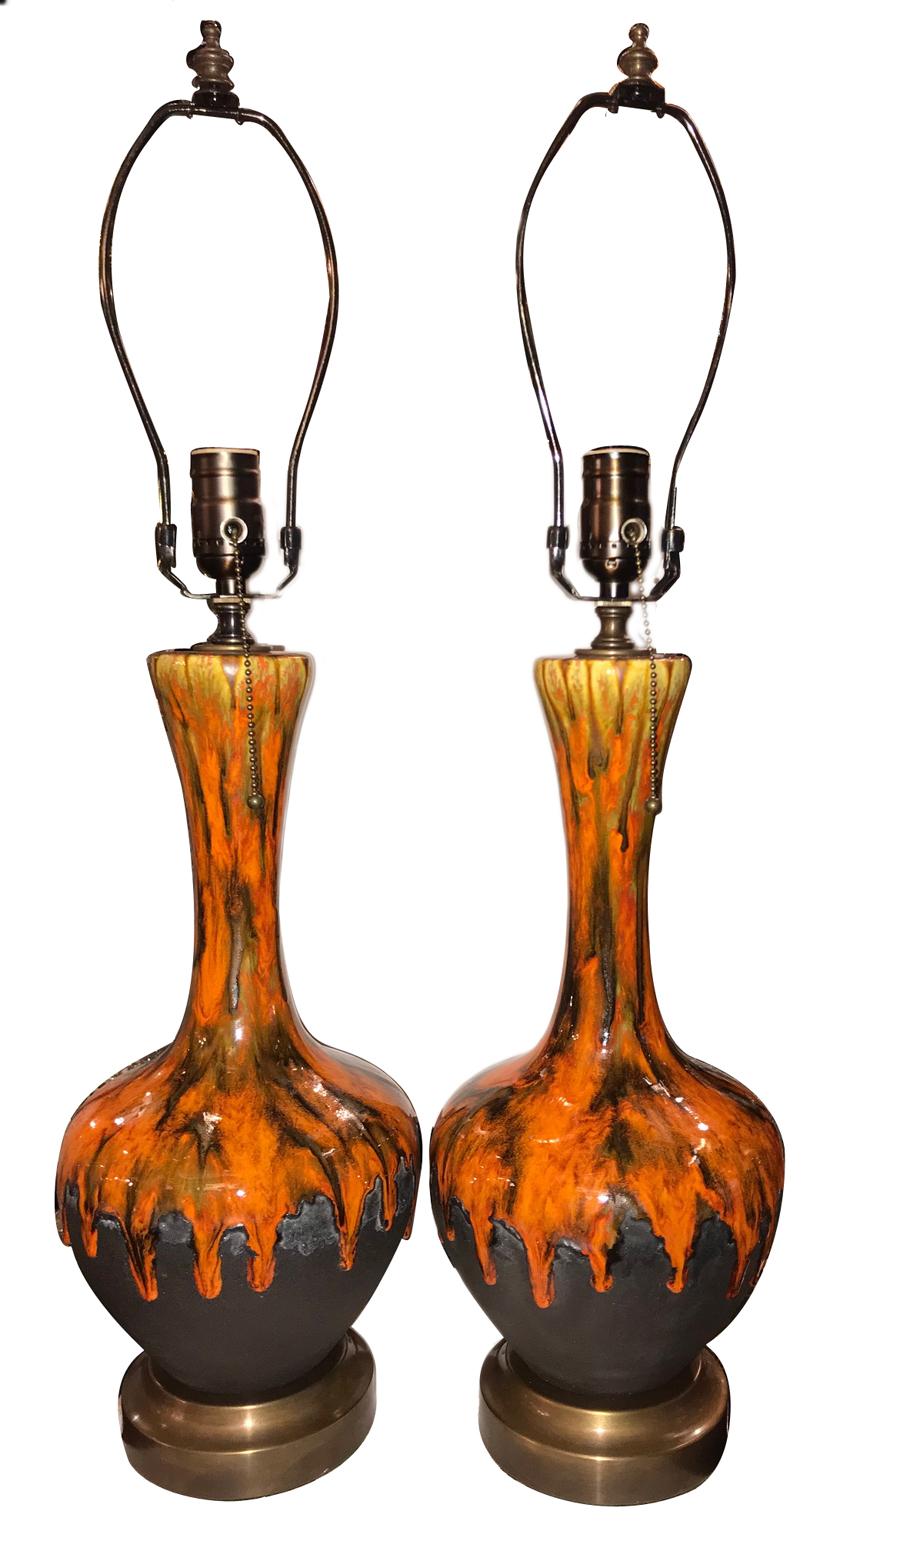 Pair of 1950s Italian porcelain lamps with brass bases.

Measurements:
Height of body: 16.75